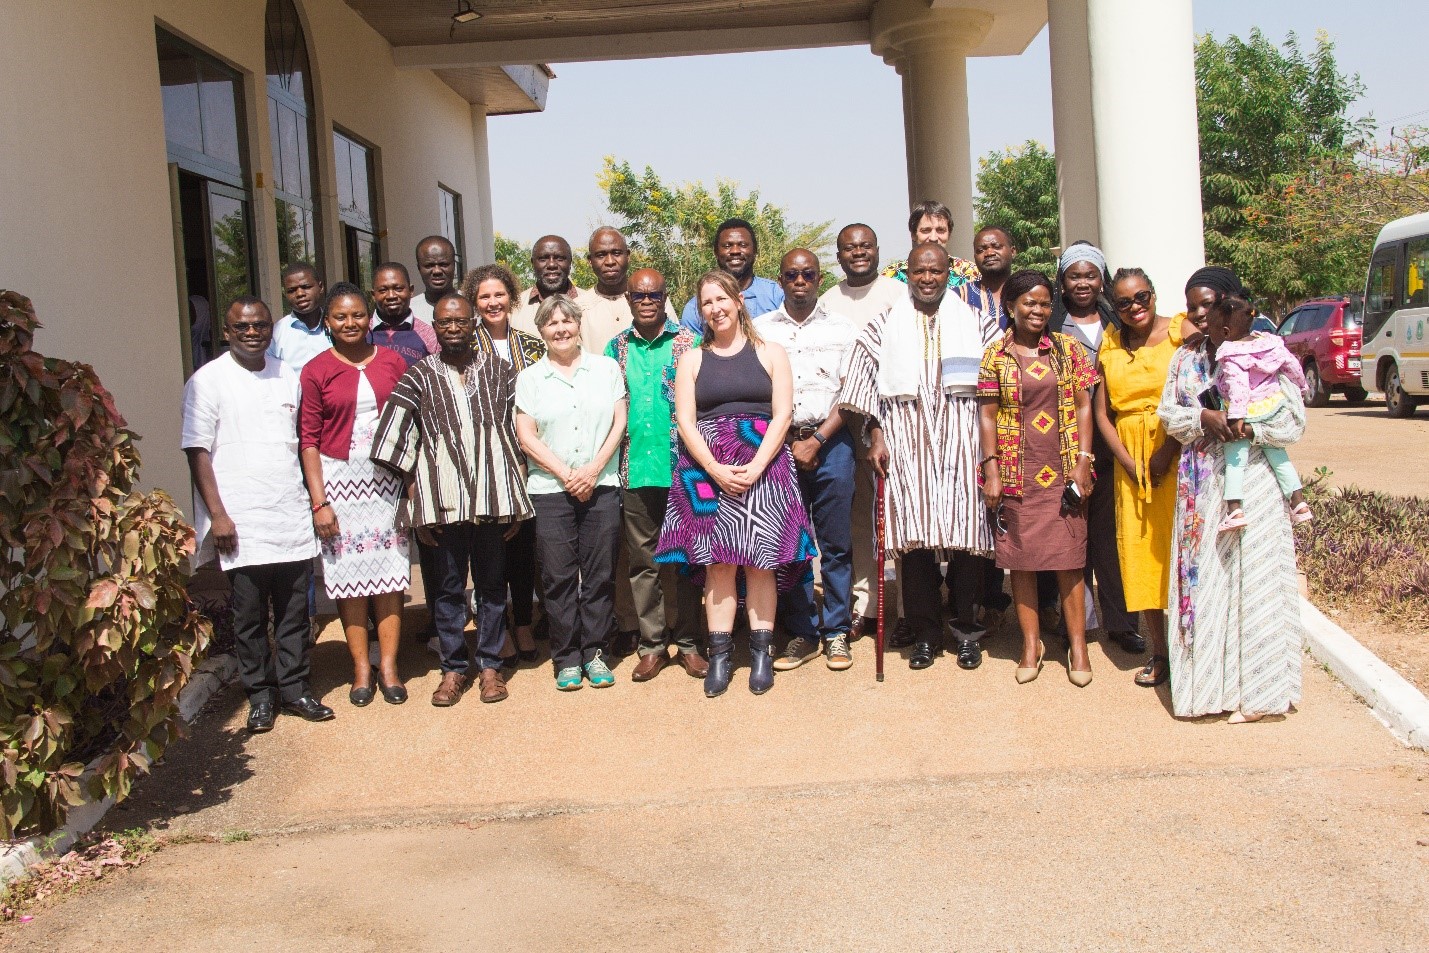 Workshop On Rural-To-Rural Partnership Between The University For Development Studies (UDS) And Appalachian State University (ASU)